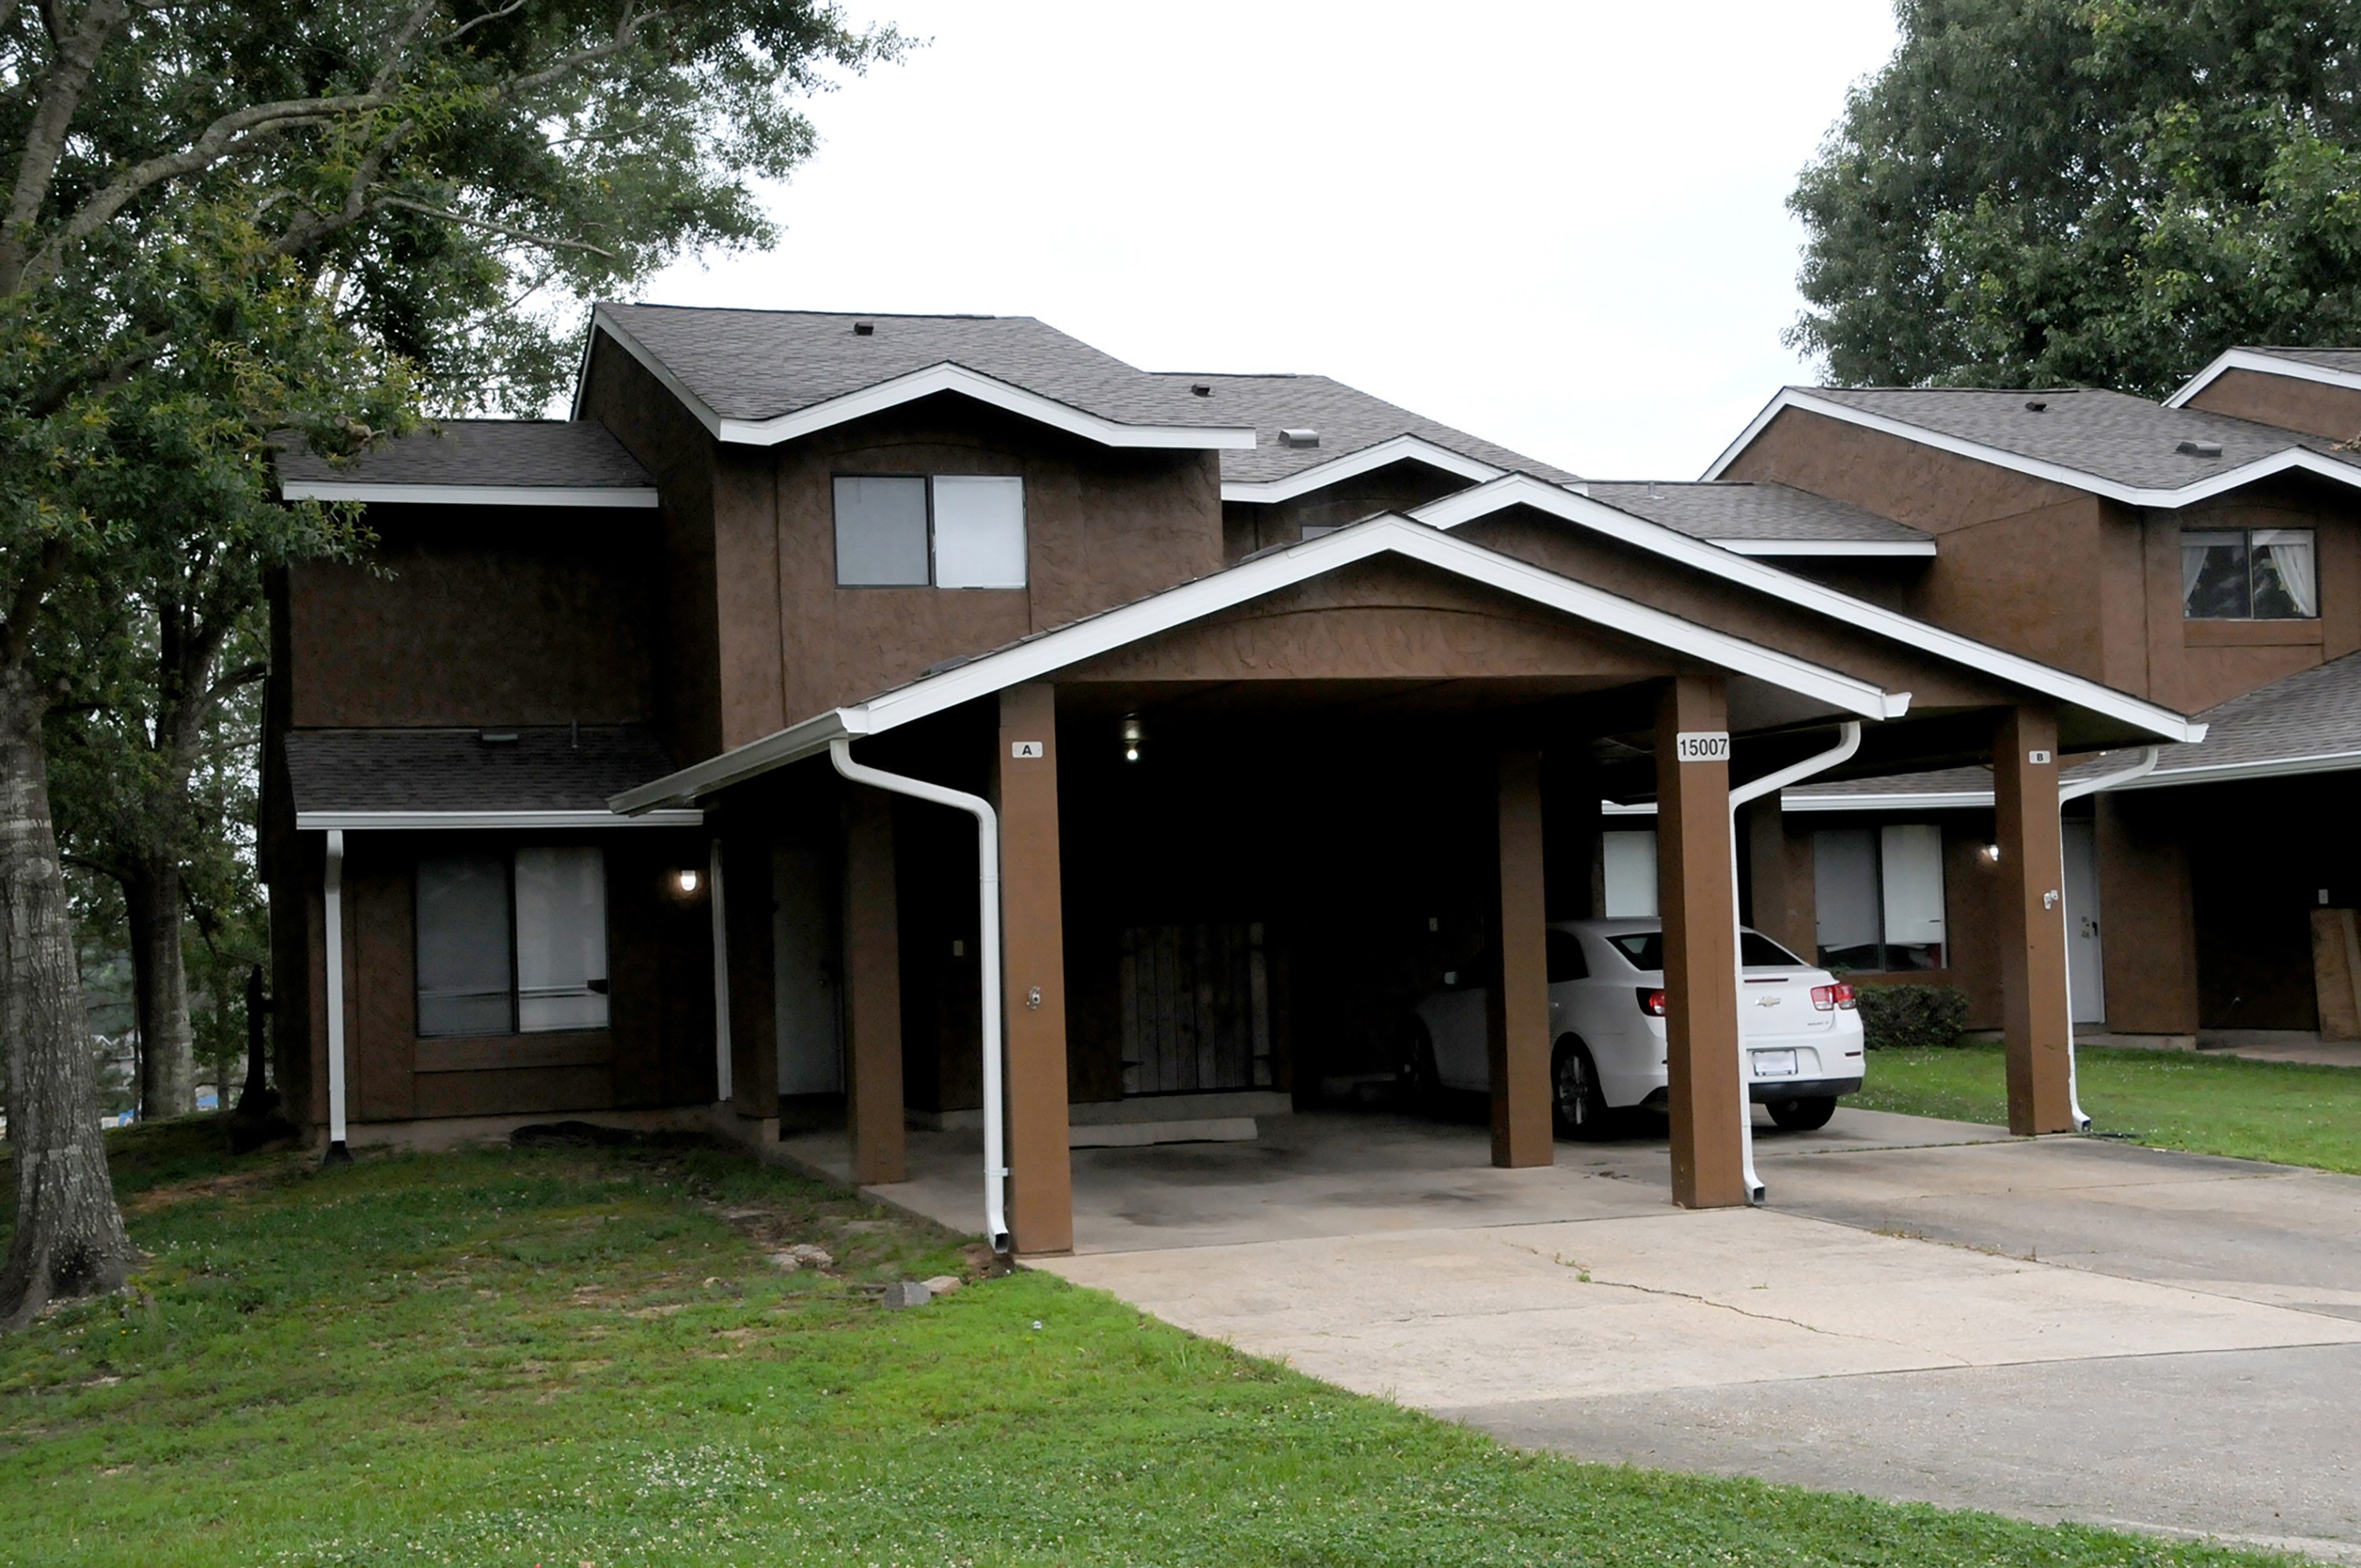 Fort Polk housing undergoes renovations Article The United States Army